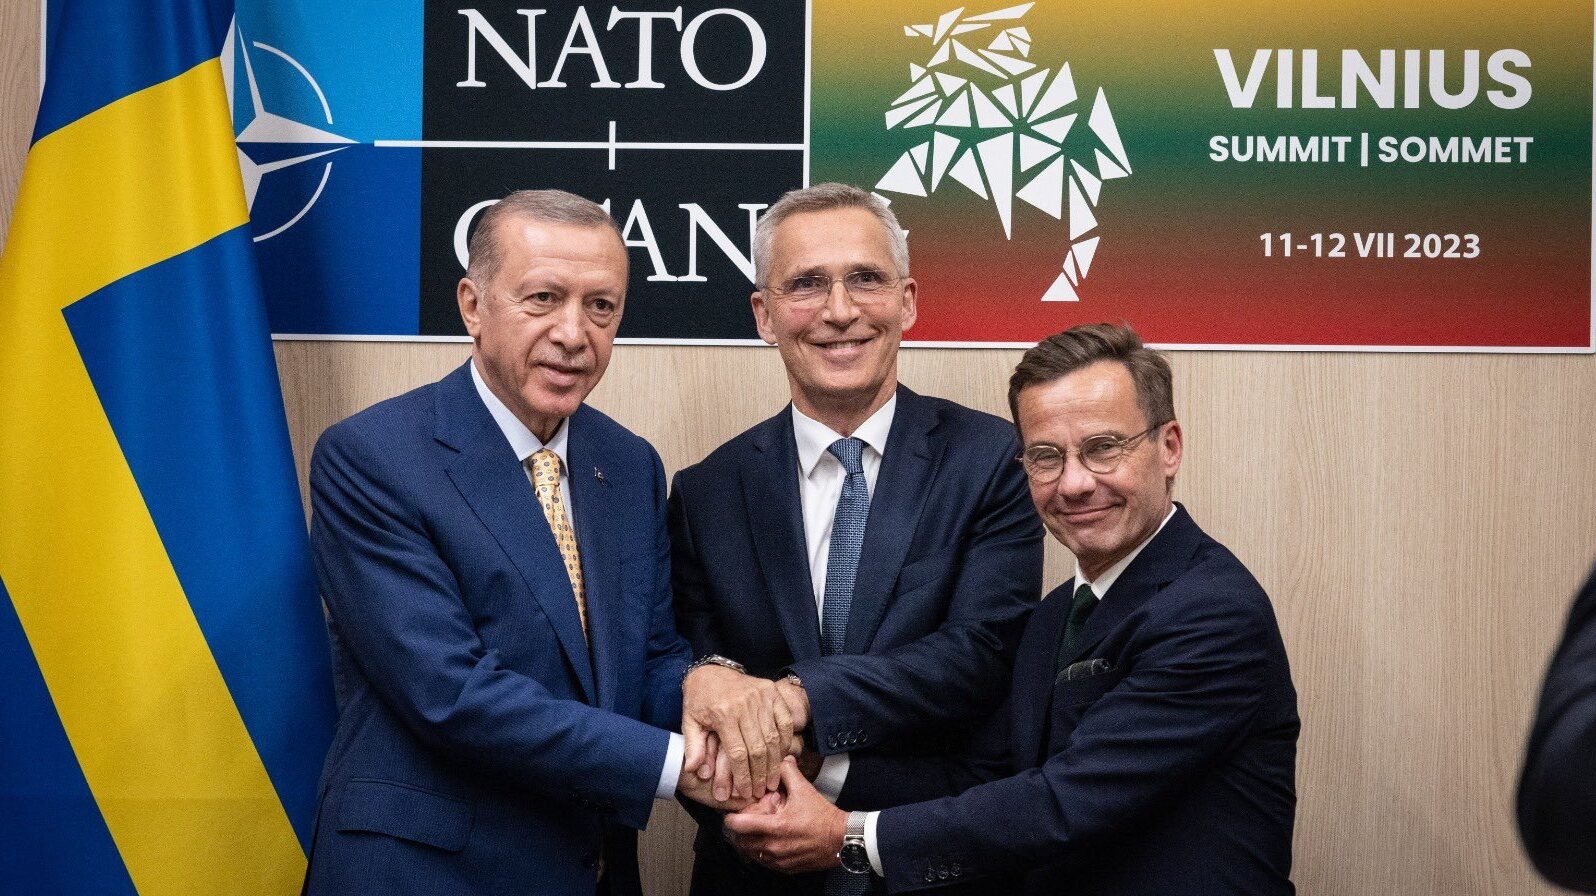 Sweden's path to NATO membership has been cleared as Turkey has given its approval to their bid